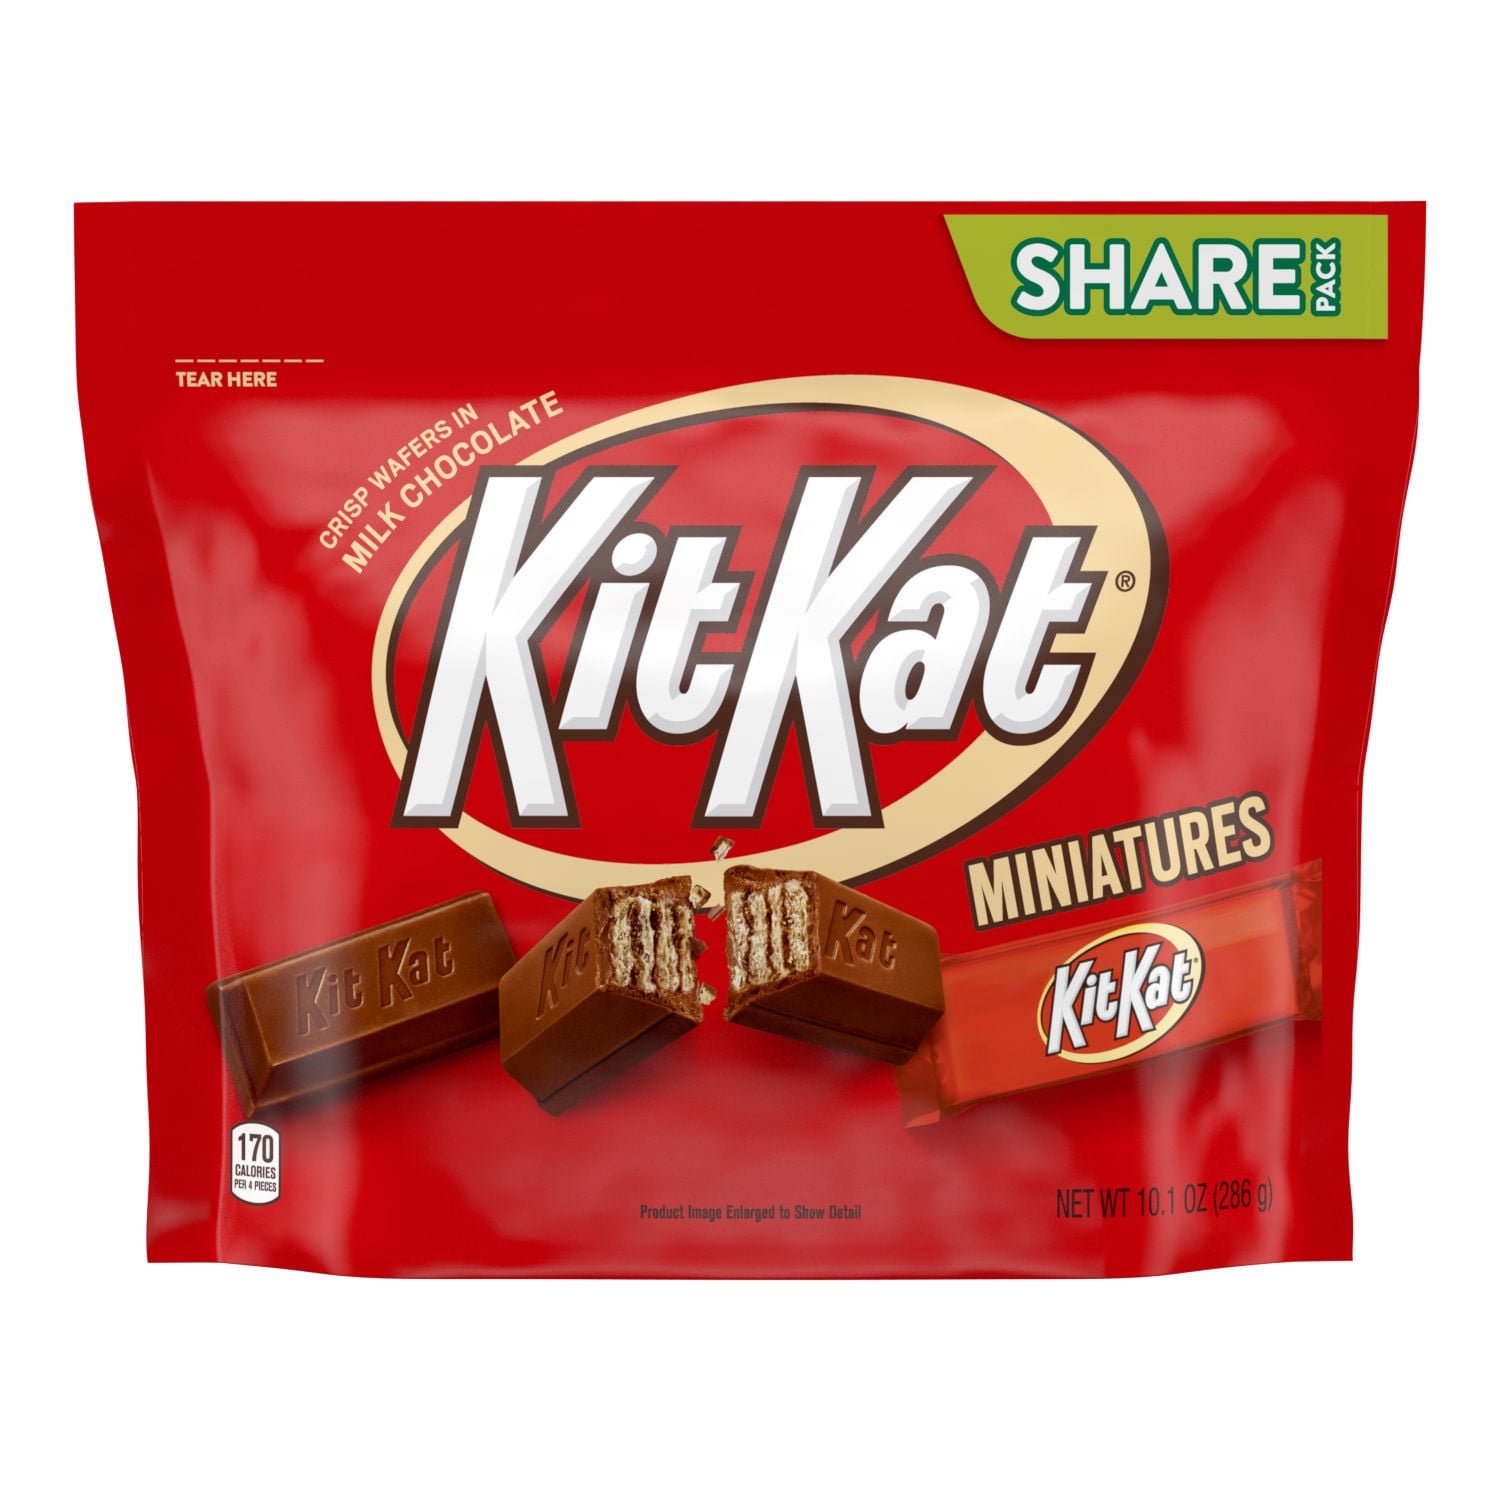 Kit Kat® Miniatures Milk Chocolate Wafer Candy, Share Pack 10.1 oz